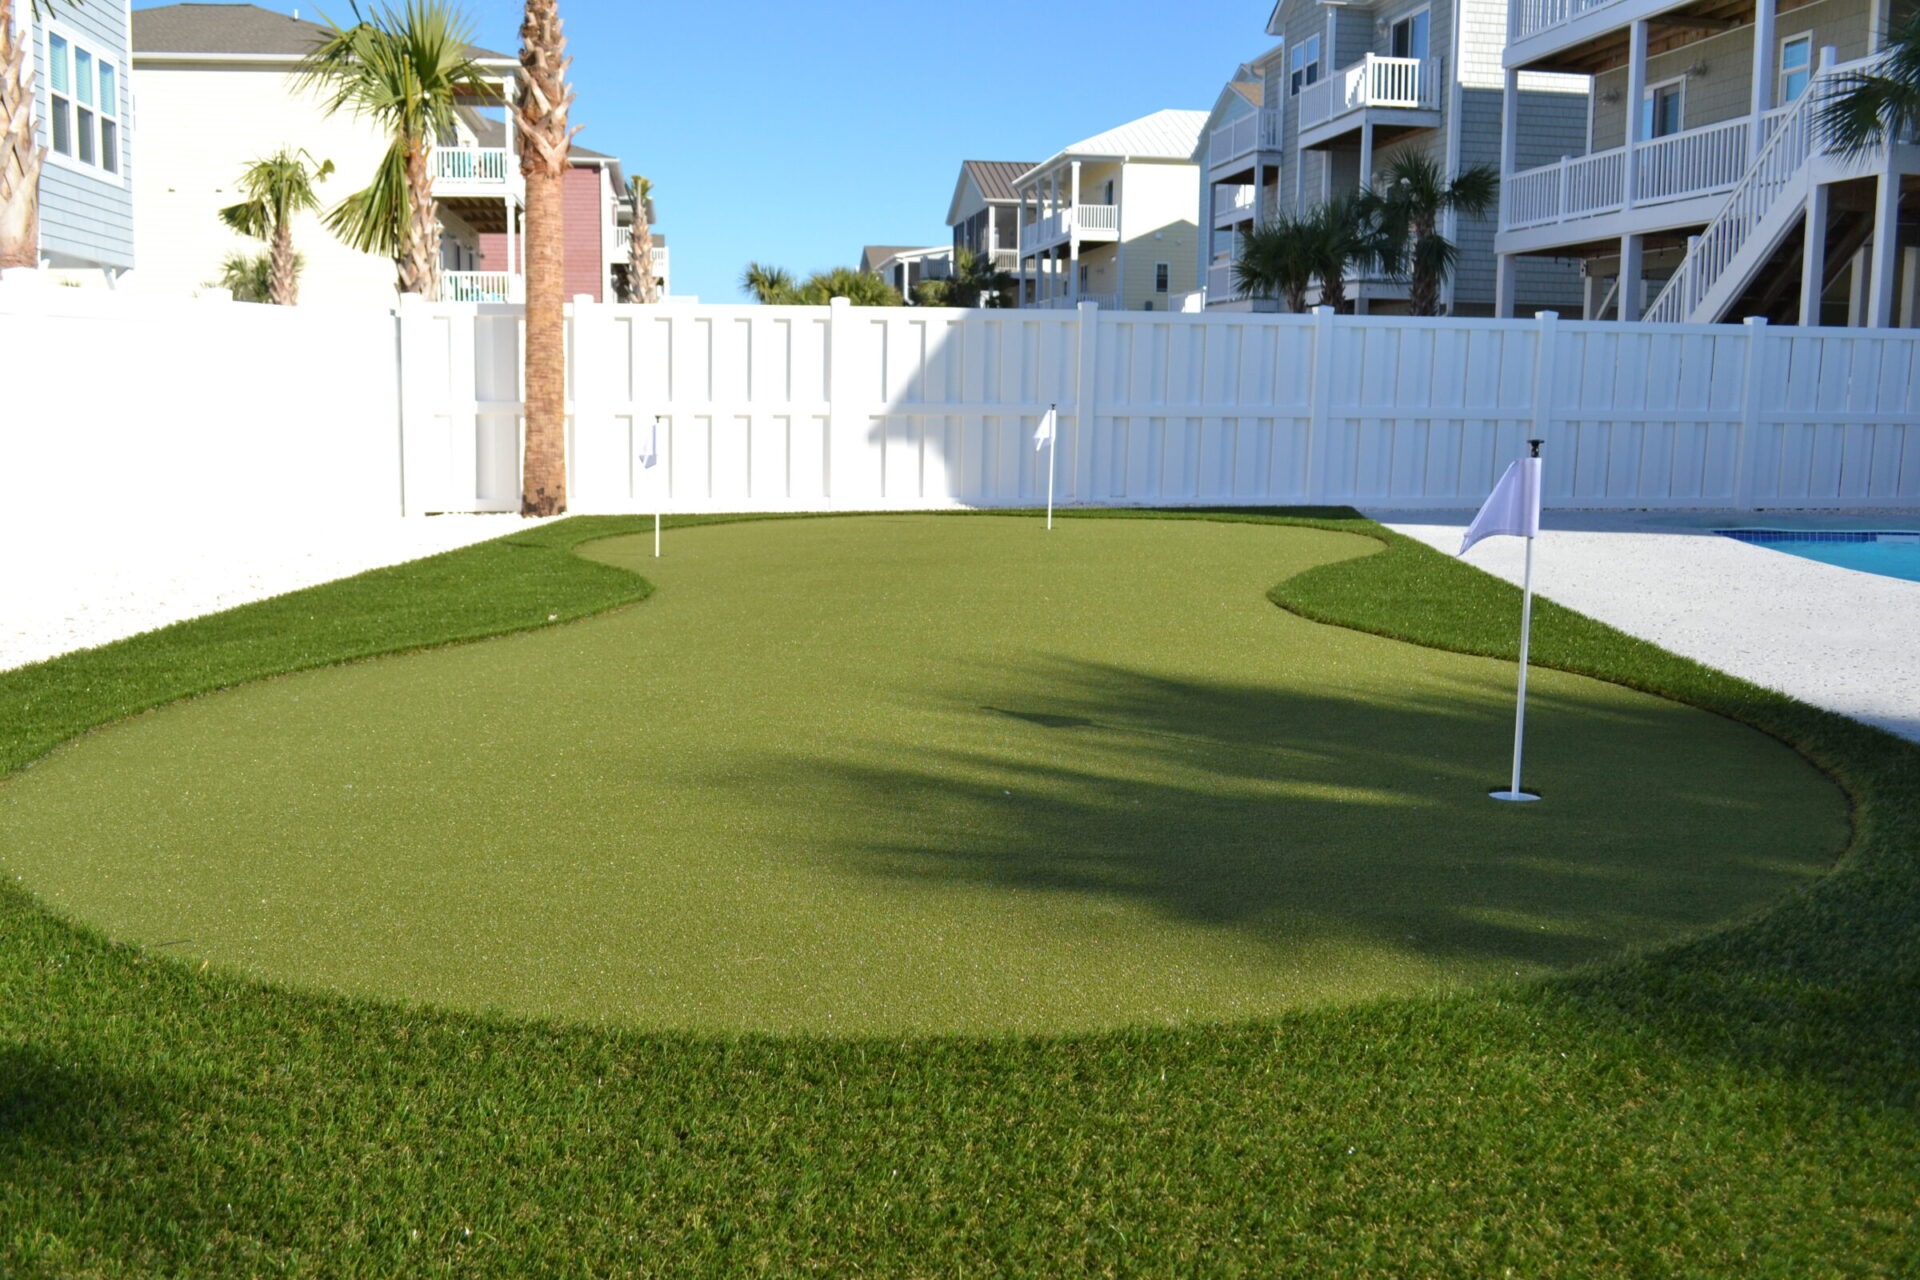 This is a backyard with a synthetic putting green next to a swimming pool, surrounded by a white fence and some beach houses with palm trees.